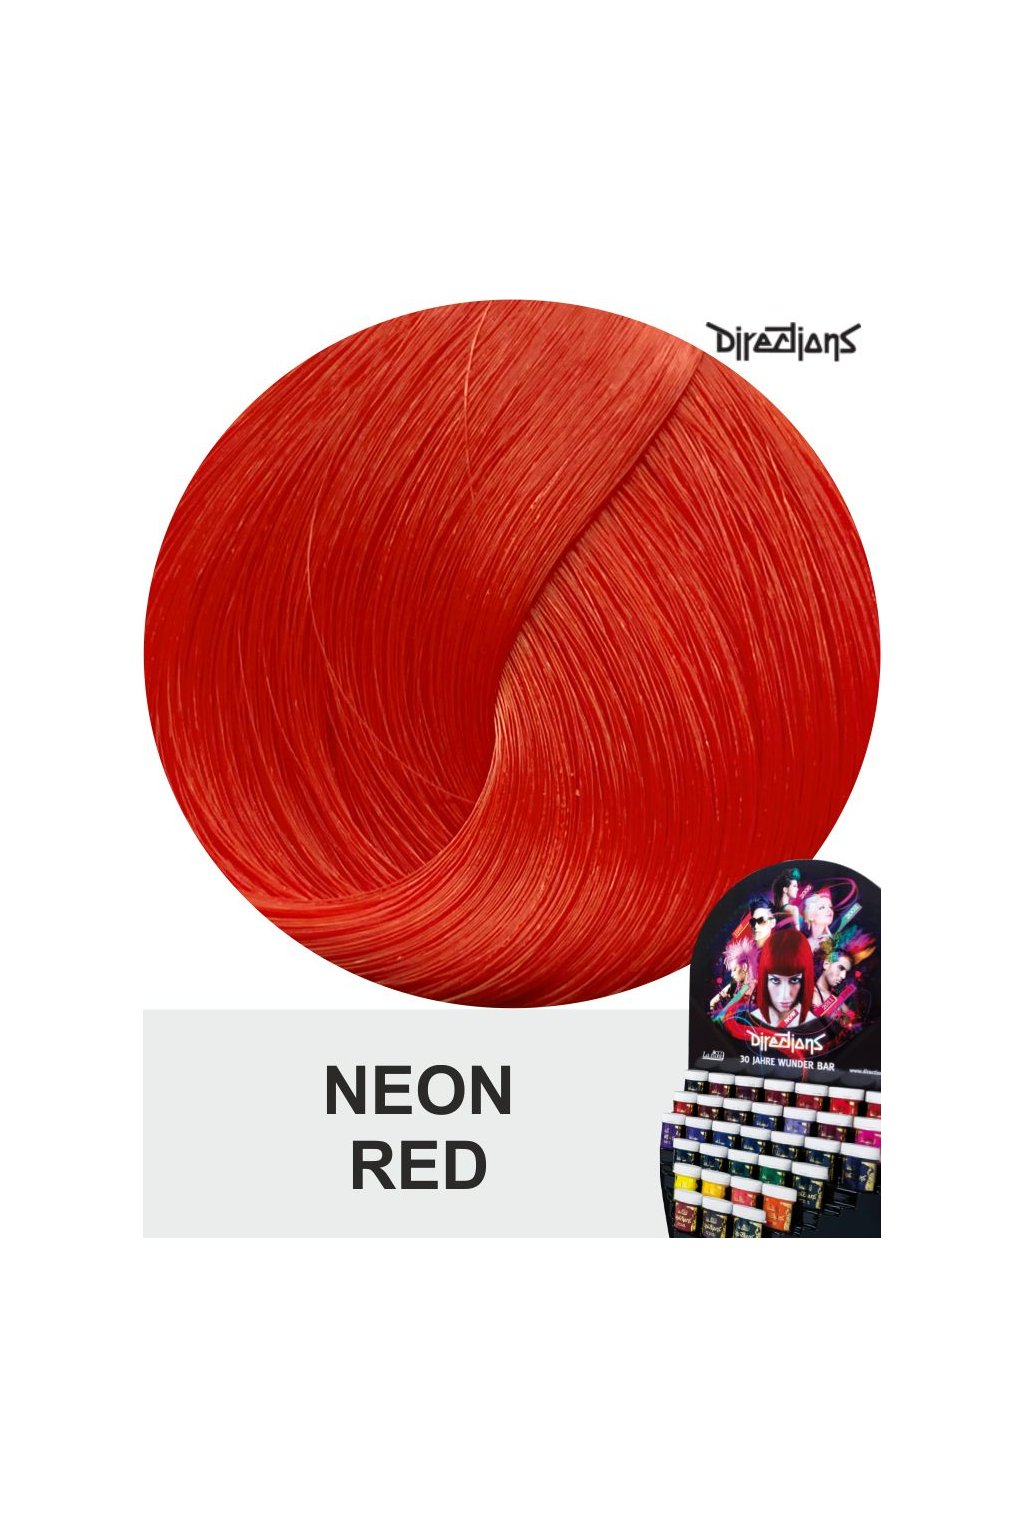 neon red 1010006